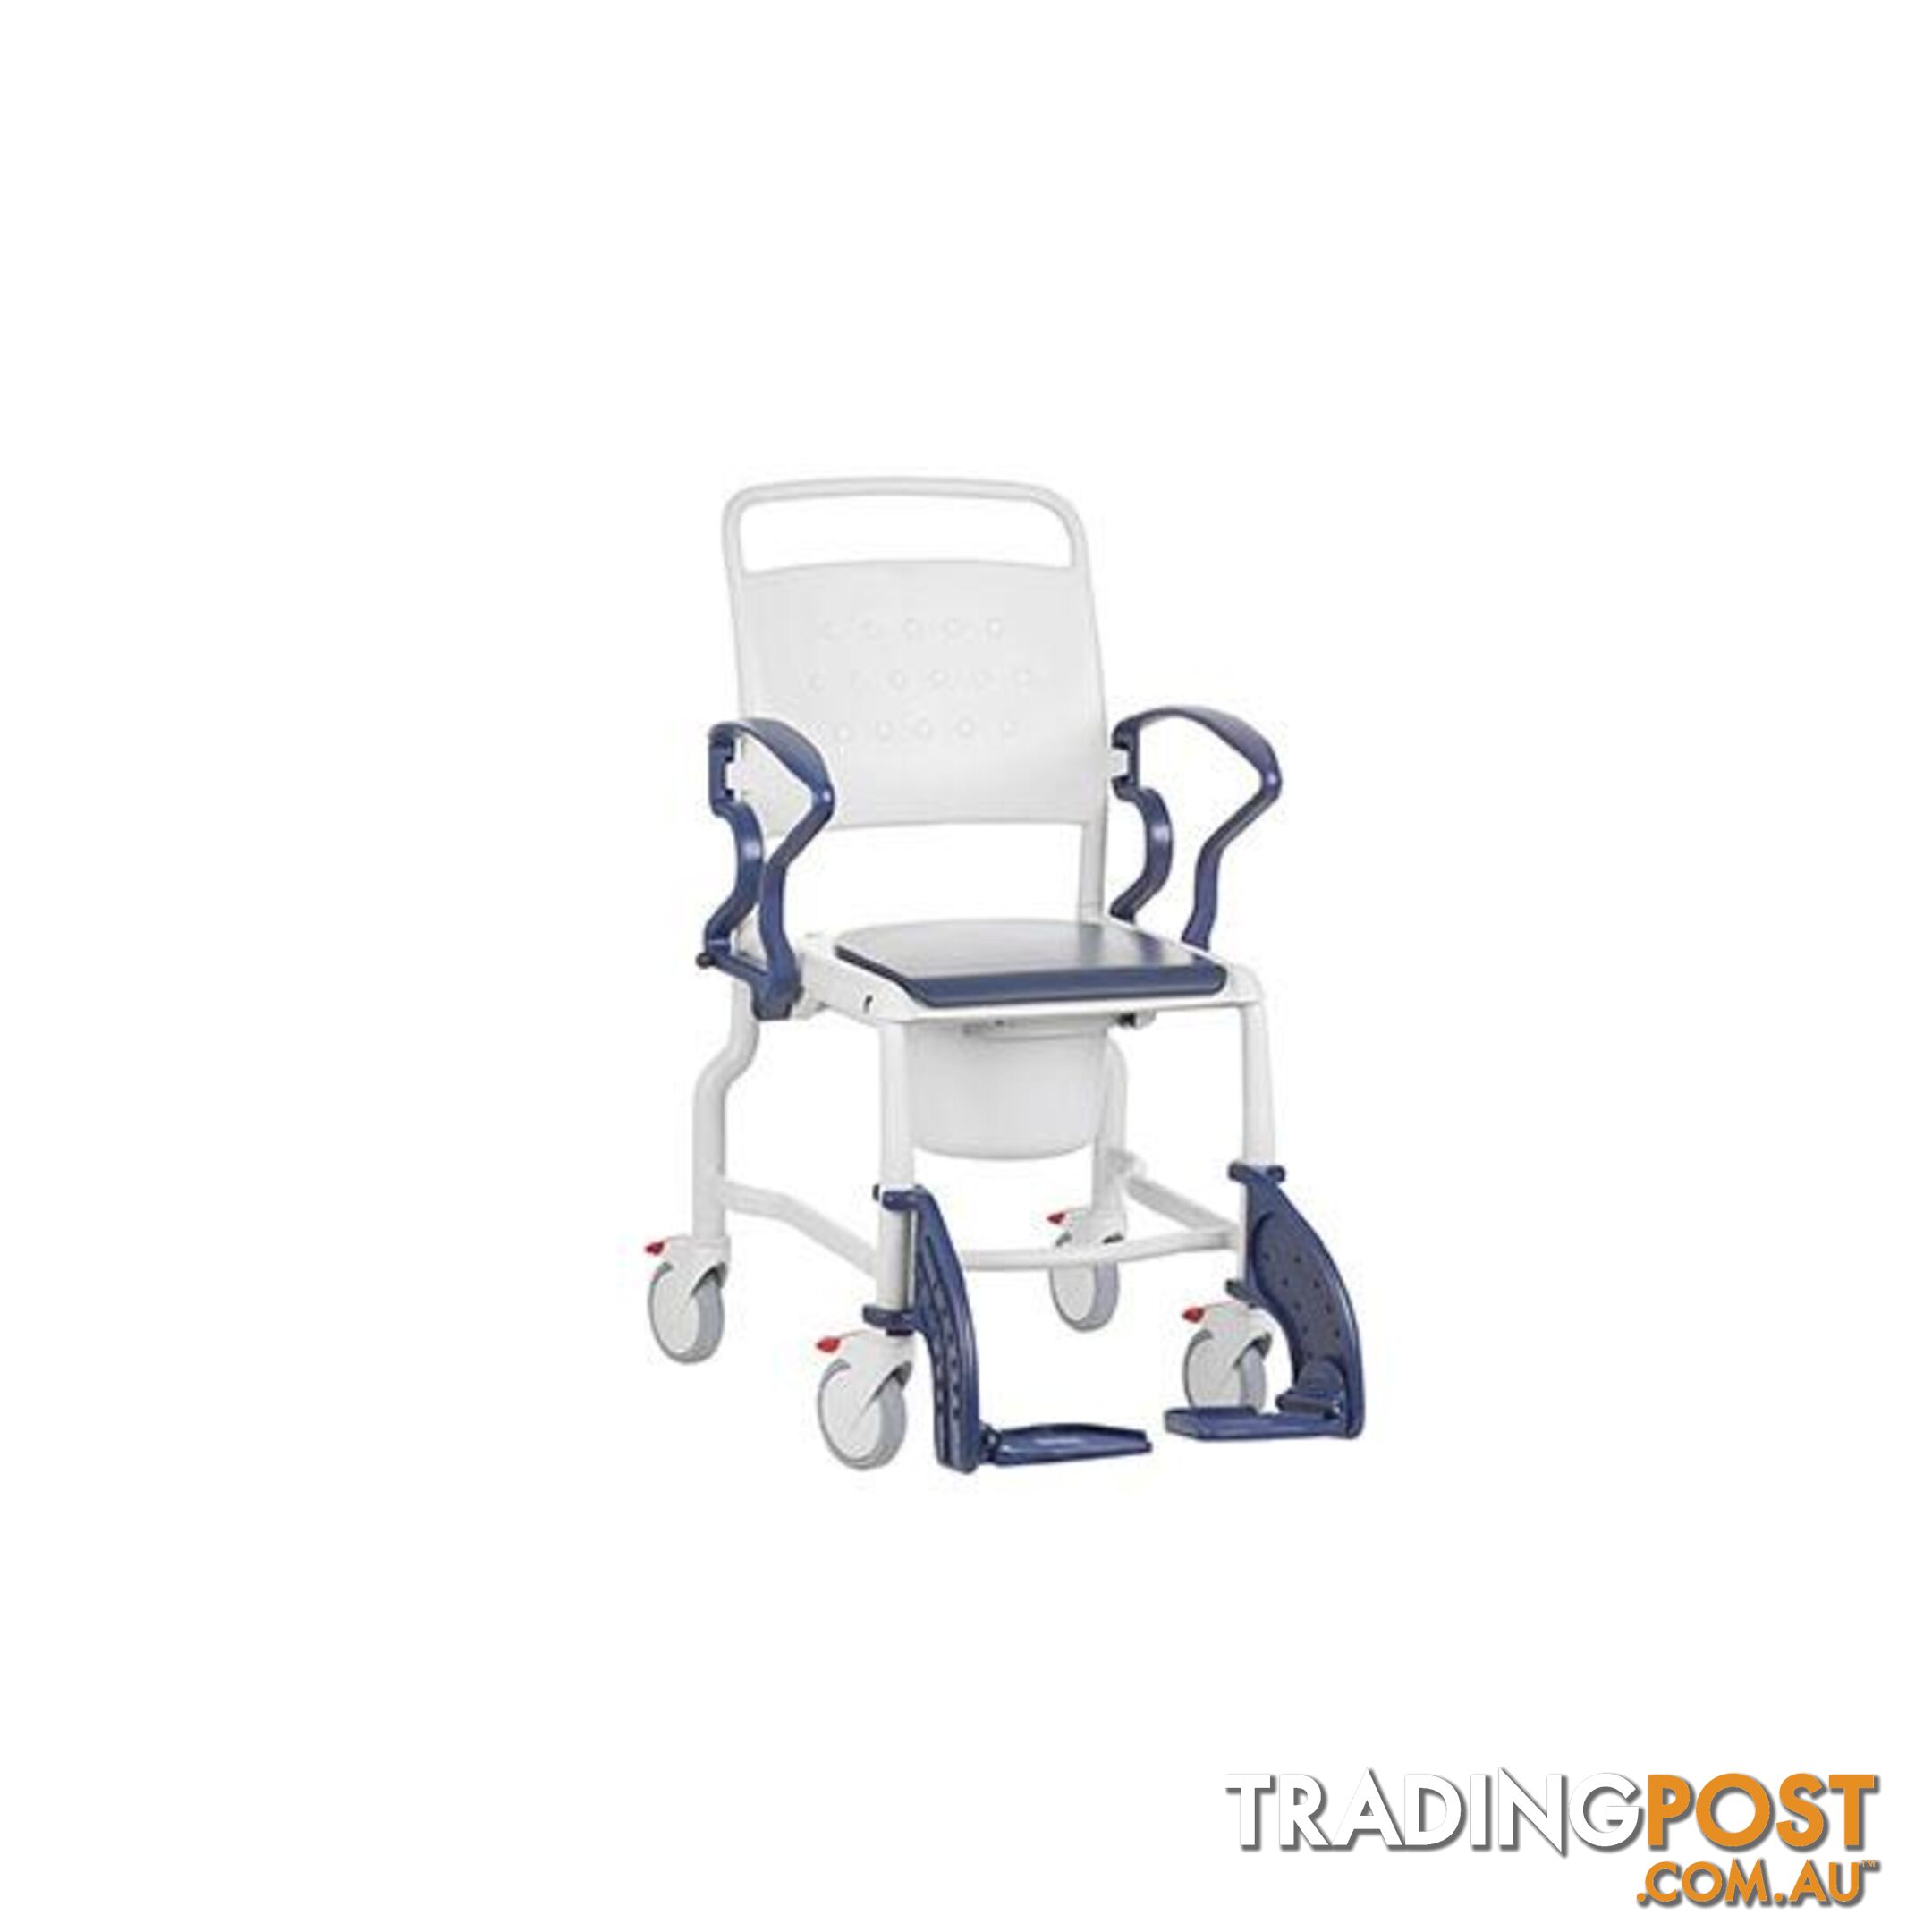 Rebotec Bonn Shower Commode Chair - Commode Chair - 7427046220071